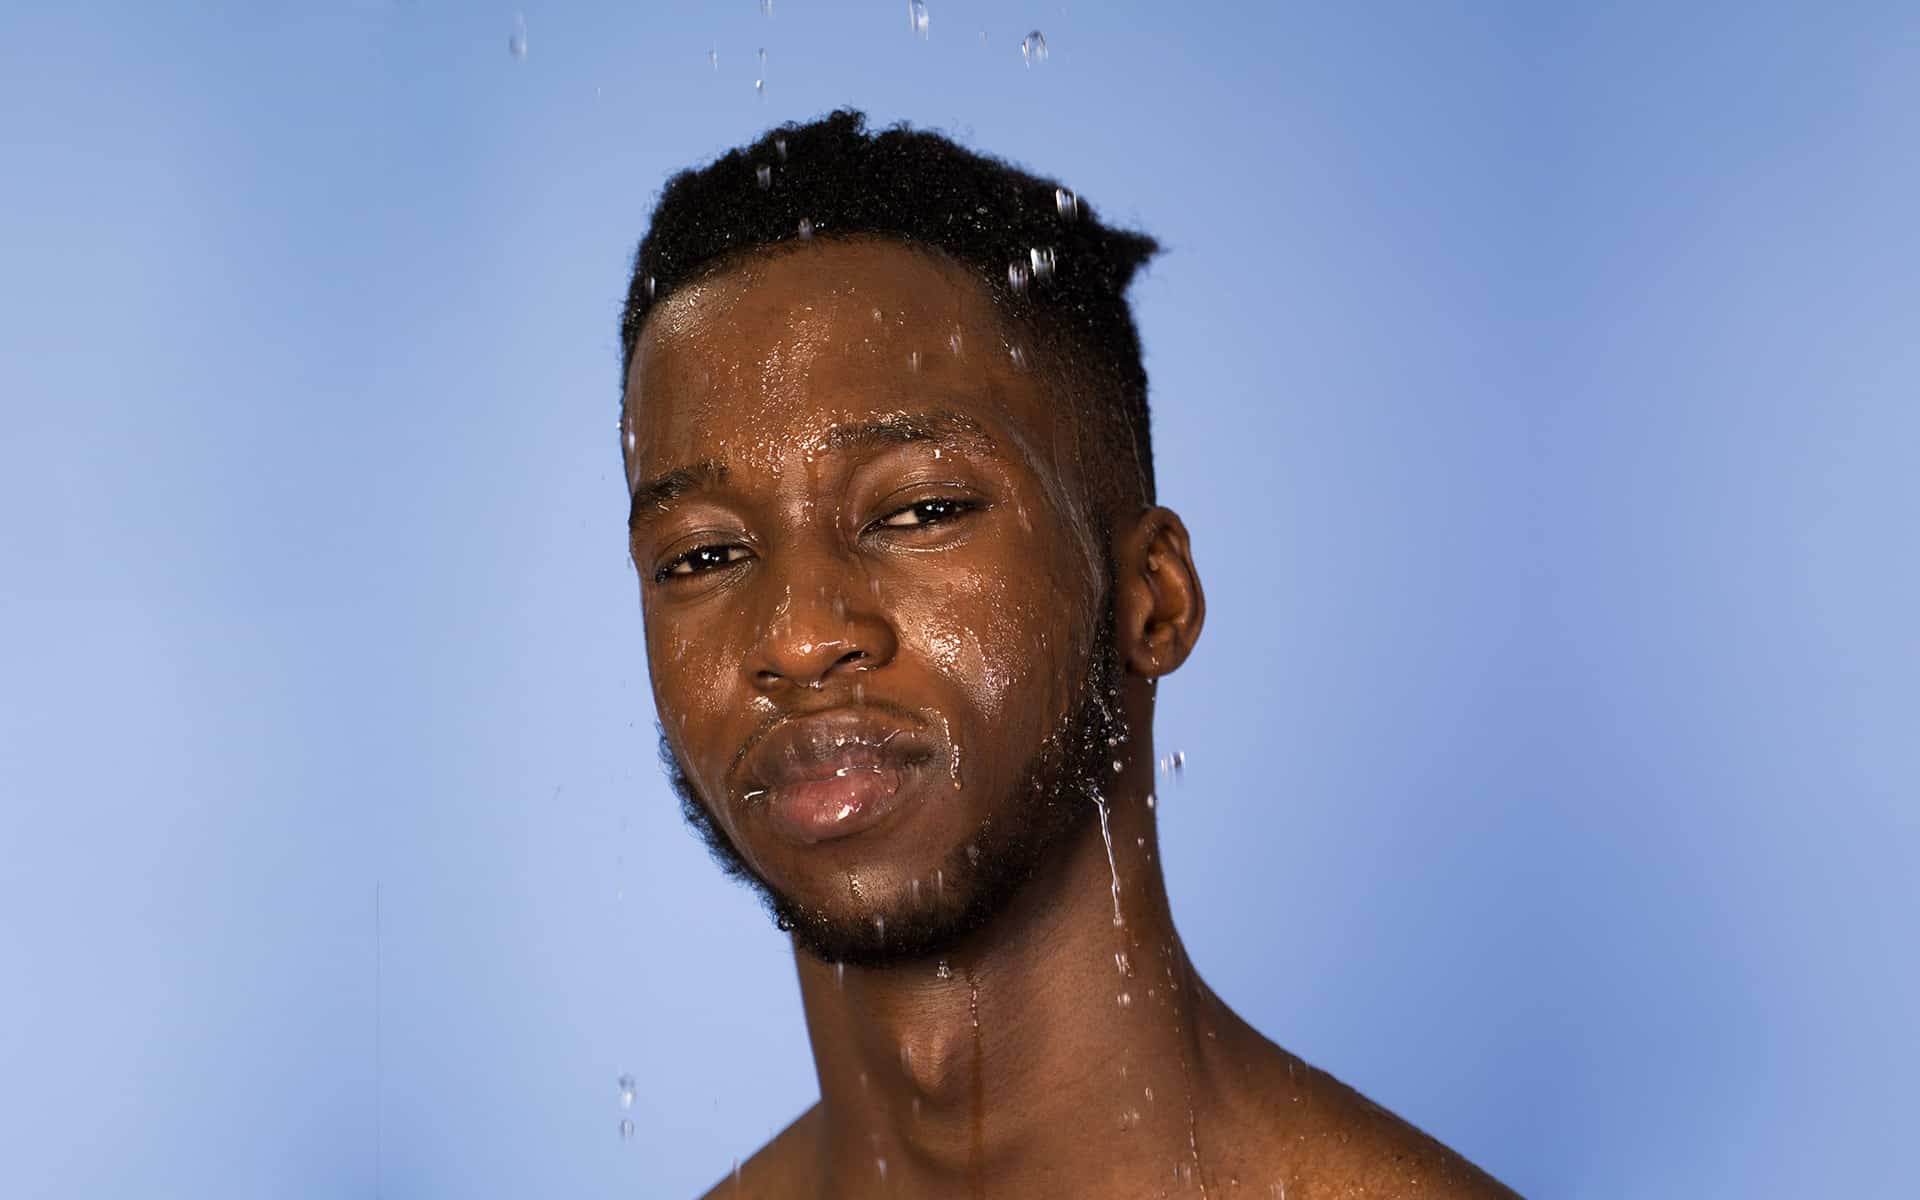 Man with his head wet, as if he has stepped out of the shower